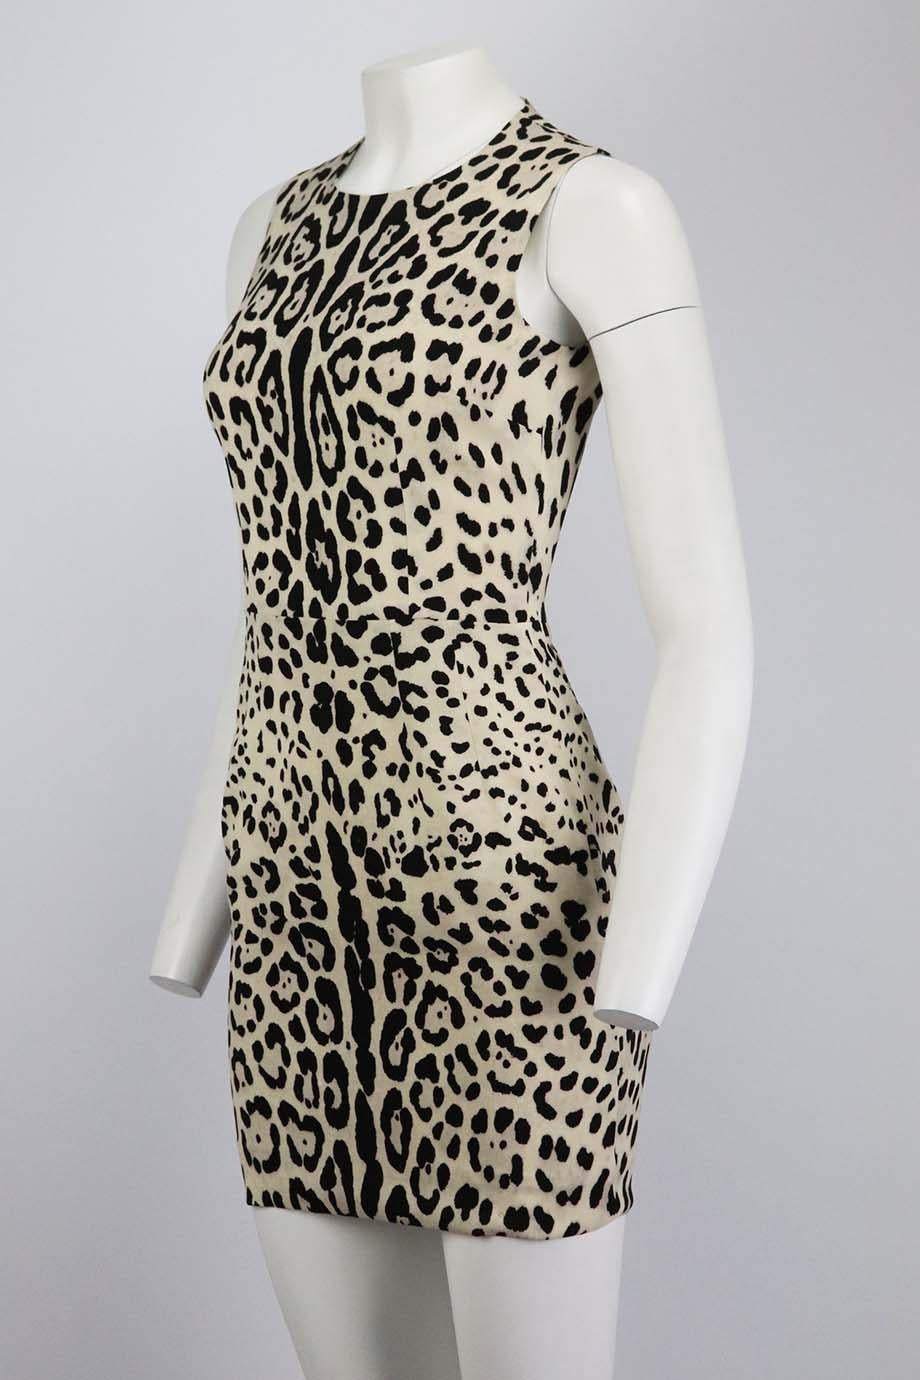 This dress by Dolce & Gabbana is made in Italy from silk-blend charmeuse, this dress has a round neckline and slim fit that nips in especially close at the waist and is finished with the brand’s signature leopard spots. Black, beige and grey